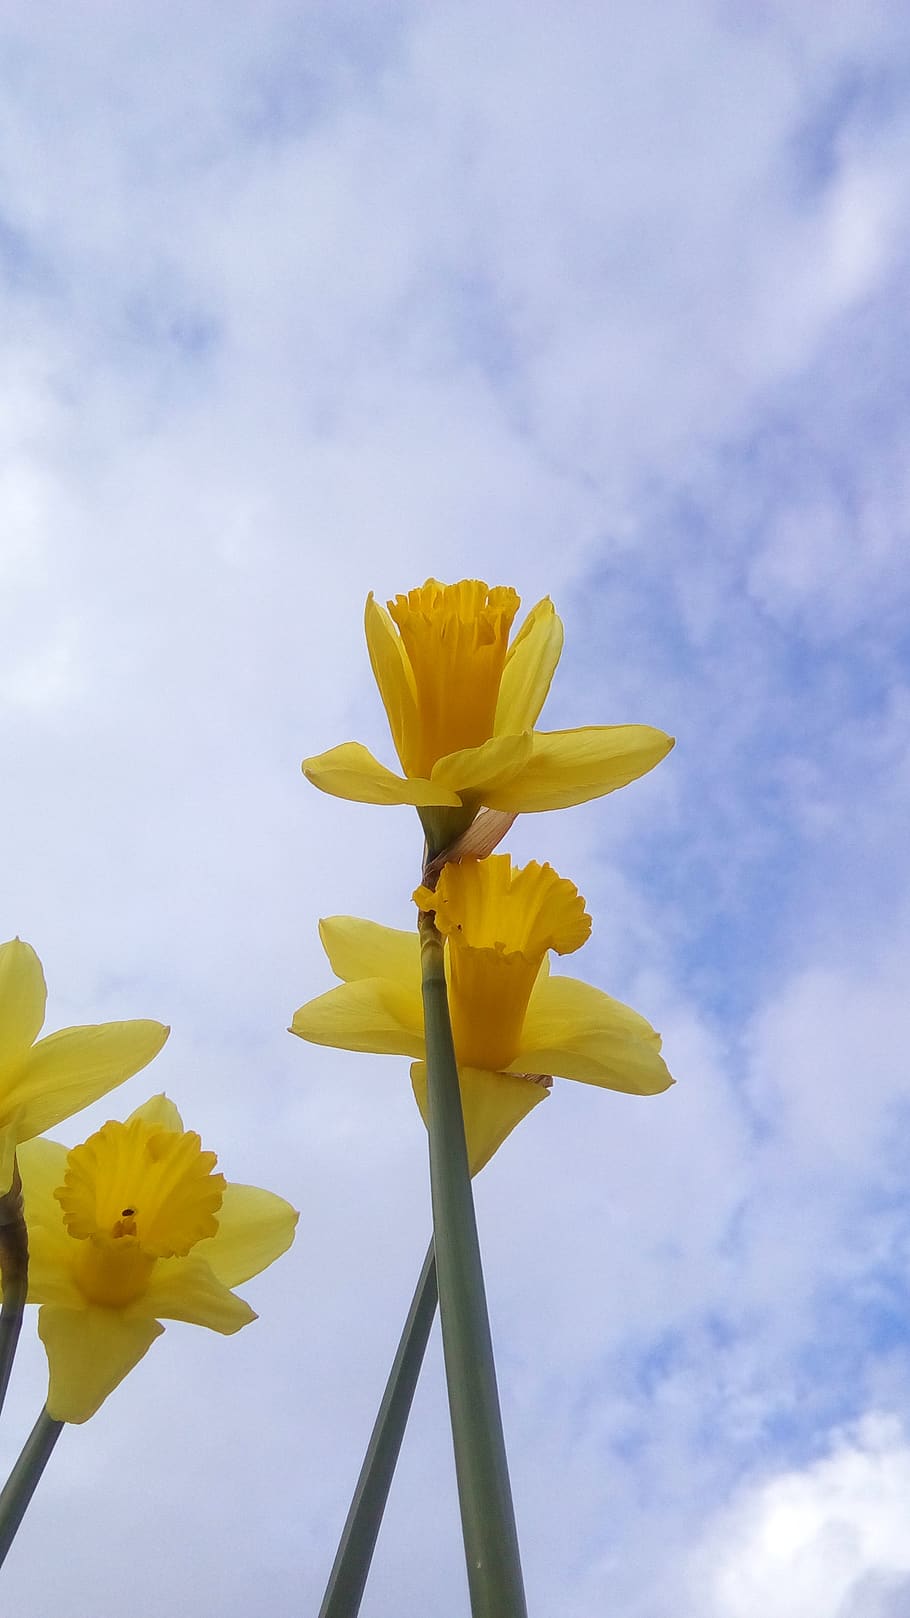 daffodils, yellow, flowers, nature, plants, winter, clouds